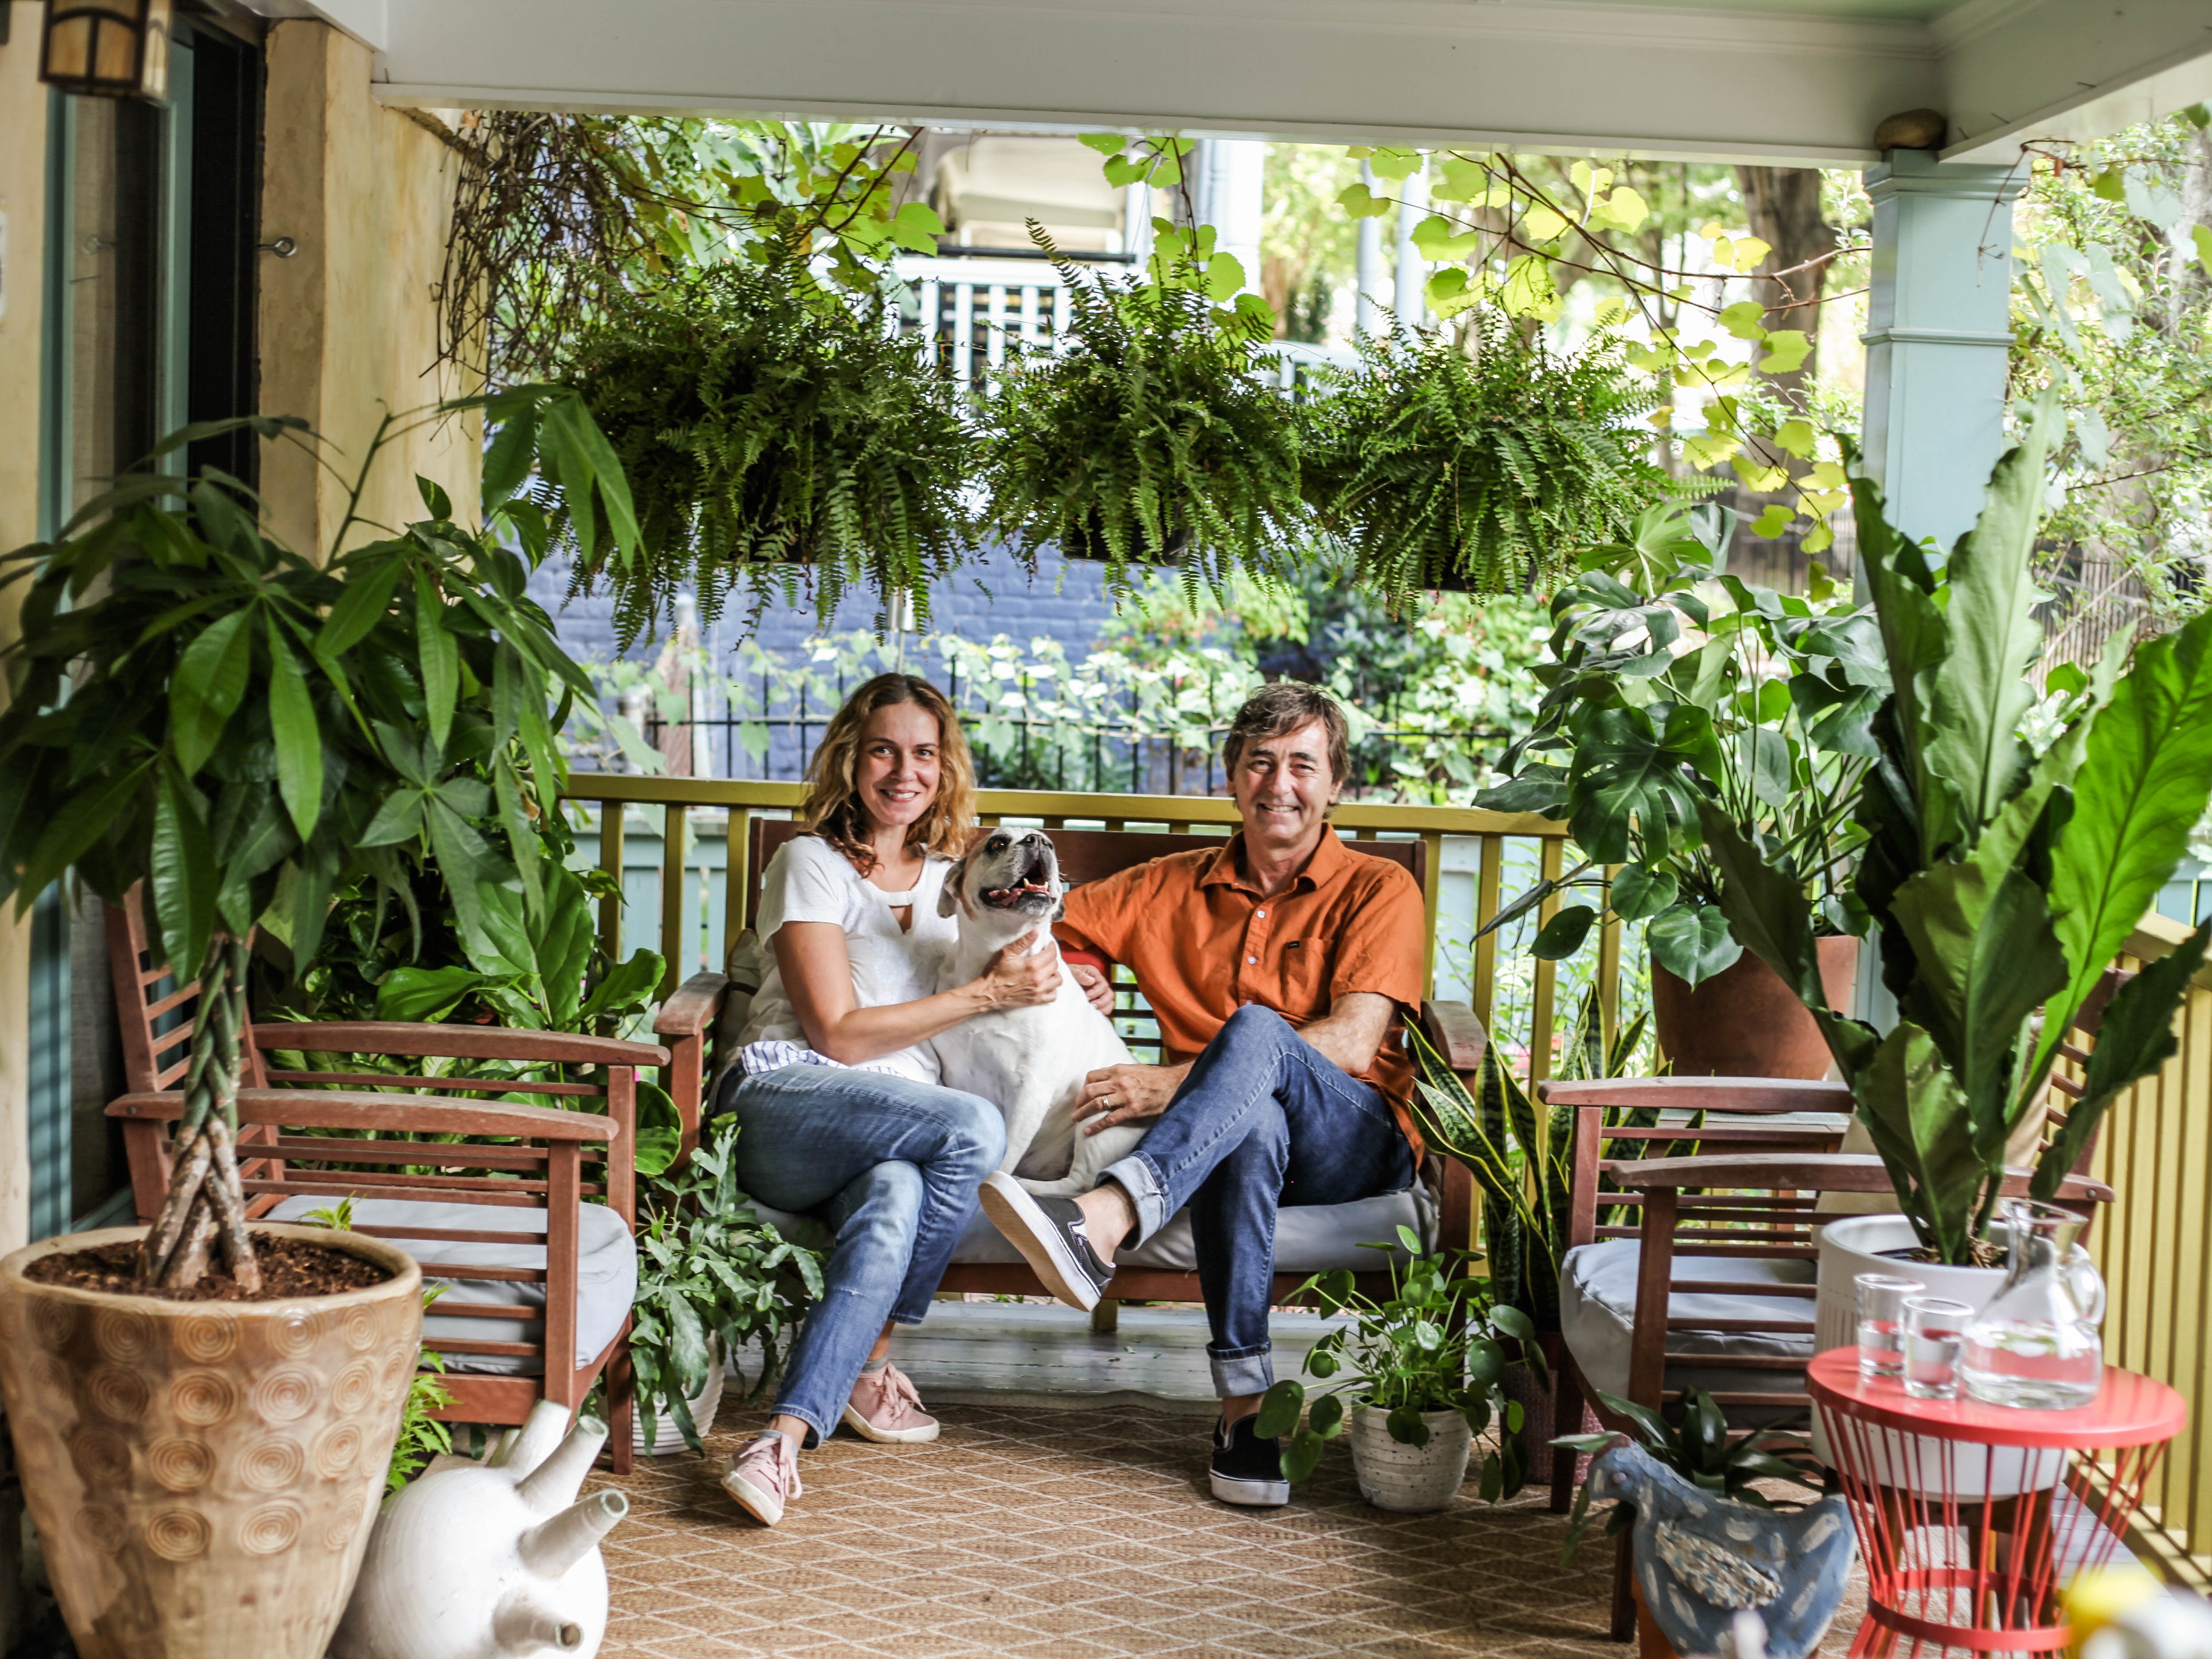 Image of Al and Suzy Newsom sitting on porch with dog